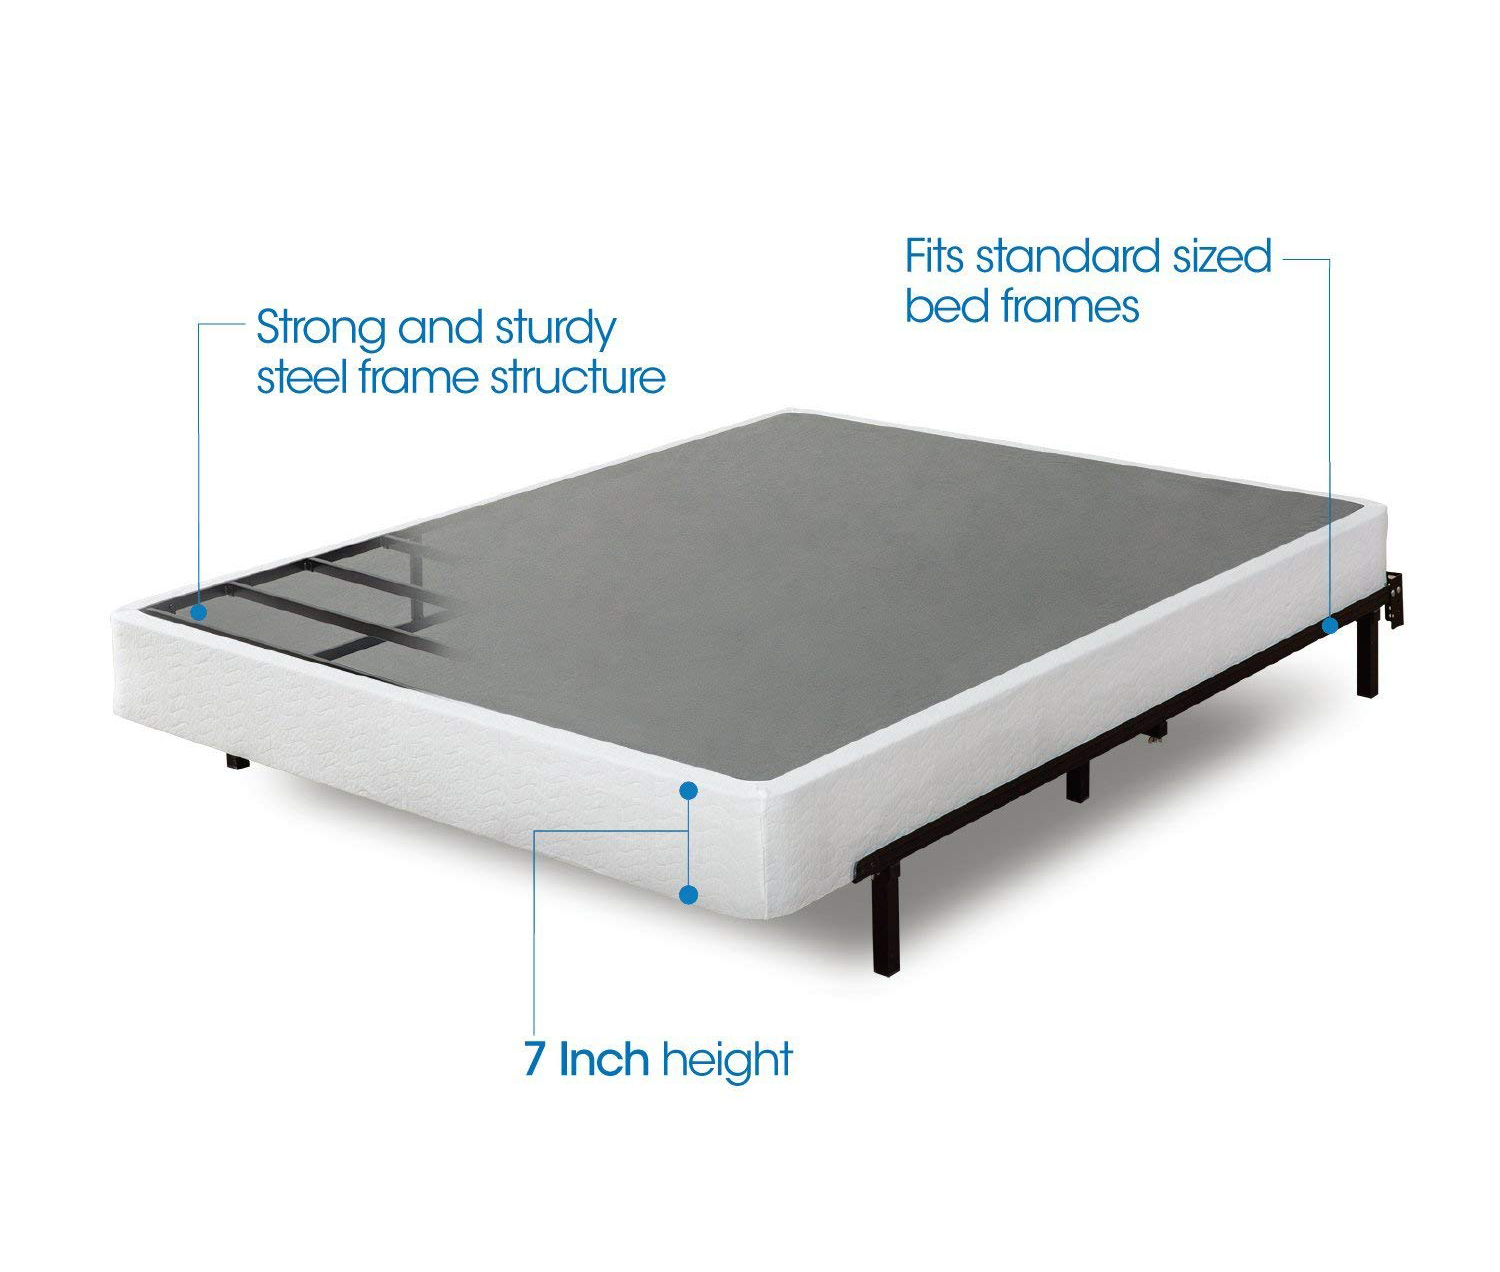 Structure of Box Spring bed